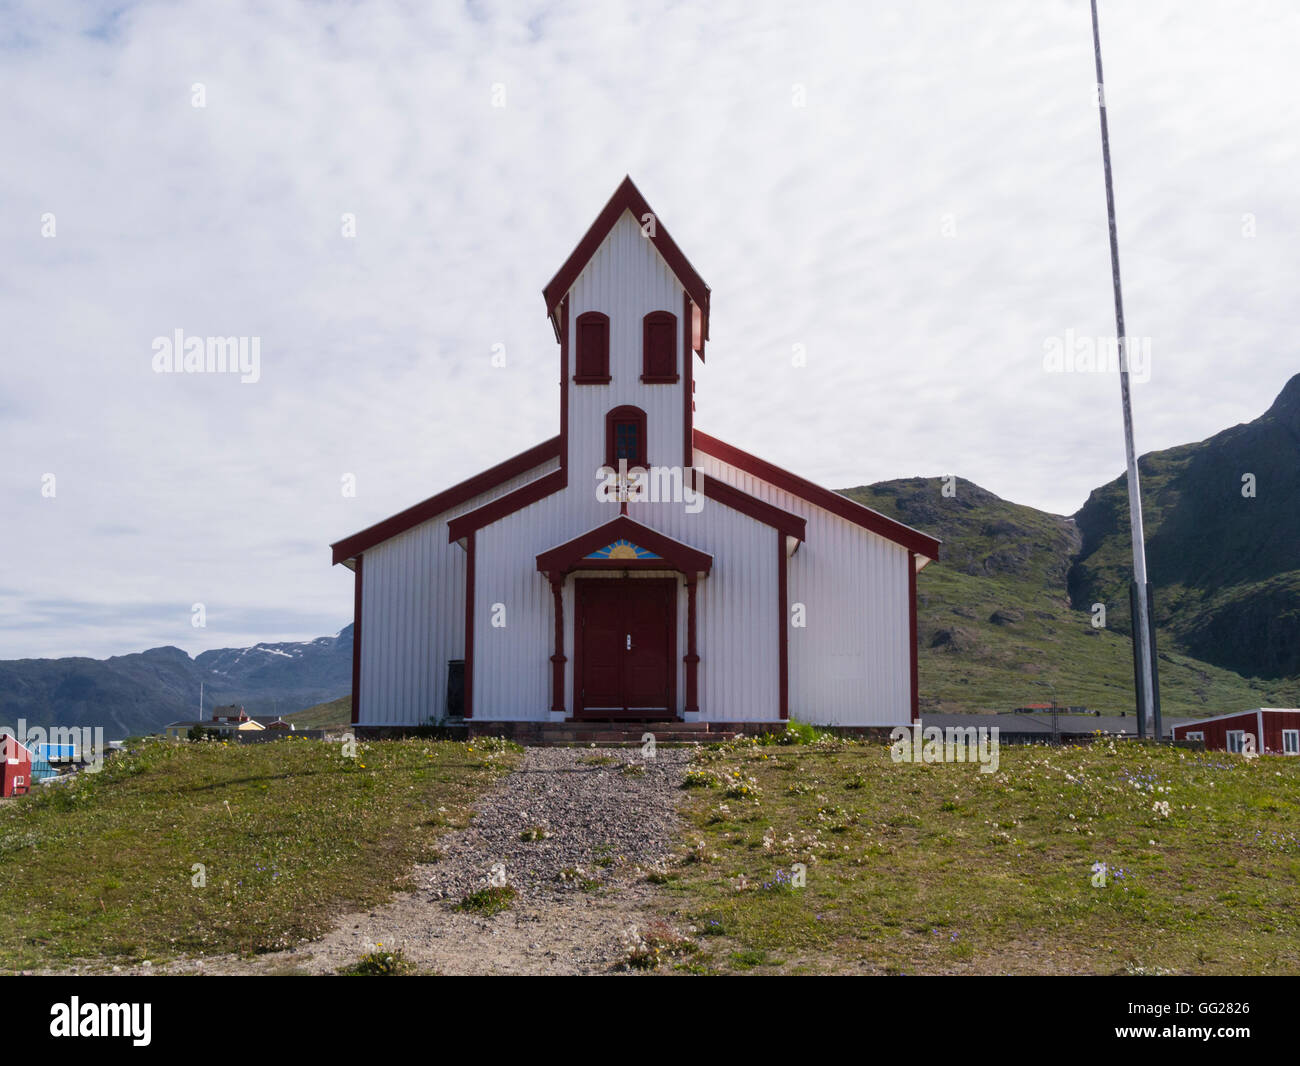 Narsaq church designed by local carpenter Pavia Høegh in 1927 extended 1981 Southern Greenland in Kujalleq municipality small fishing farmingcommunity Stock Photo